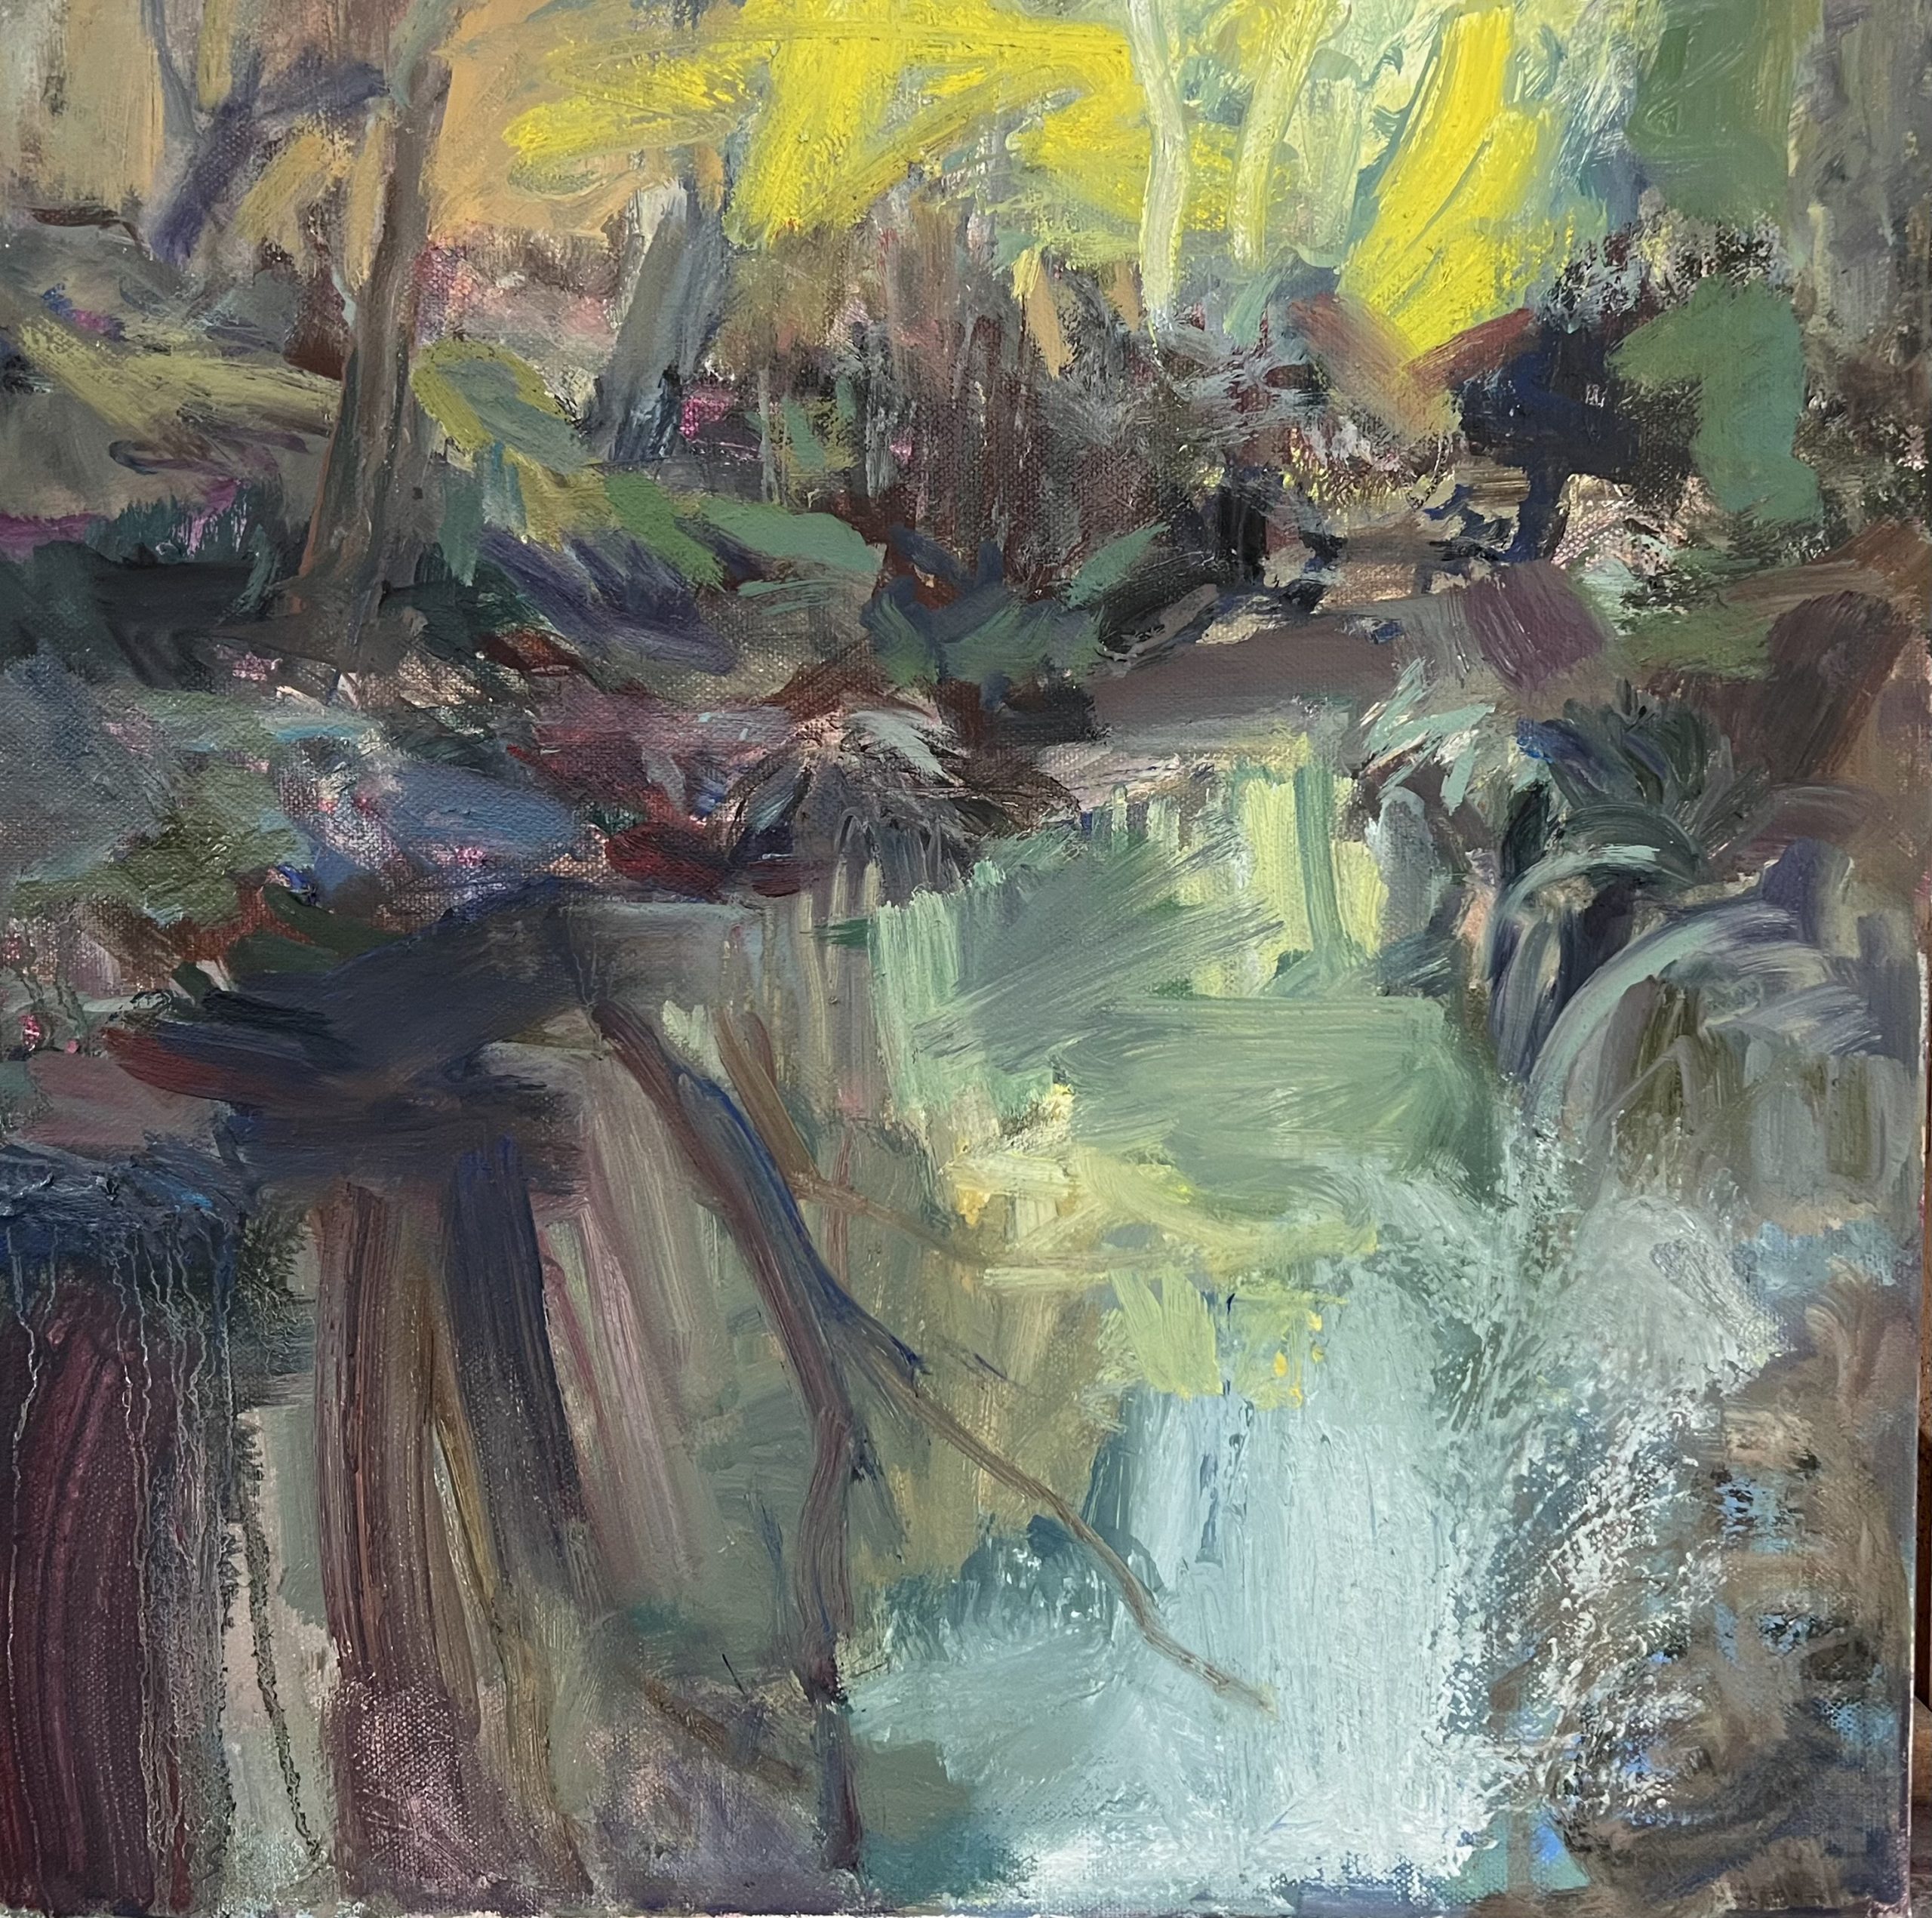 Kerry McInnis 'Washpool NP 3' oil and oil stick on canvas 40 x 40cm $2,800